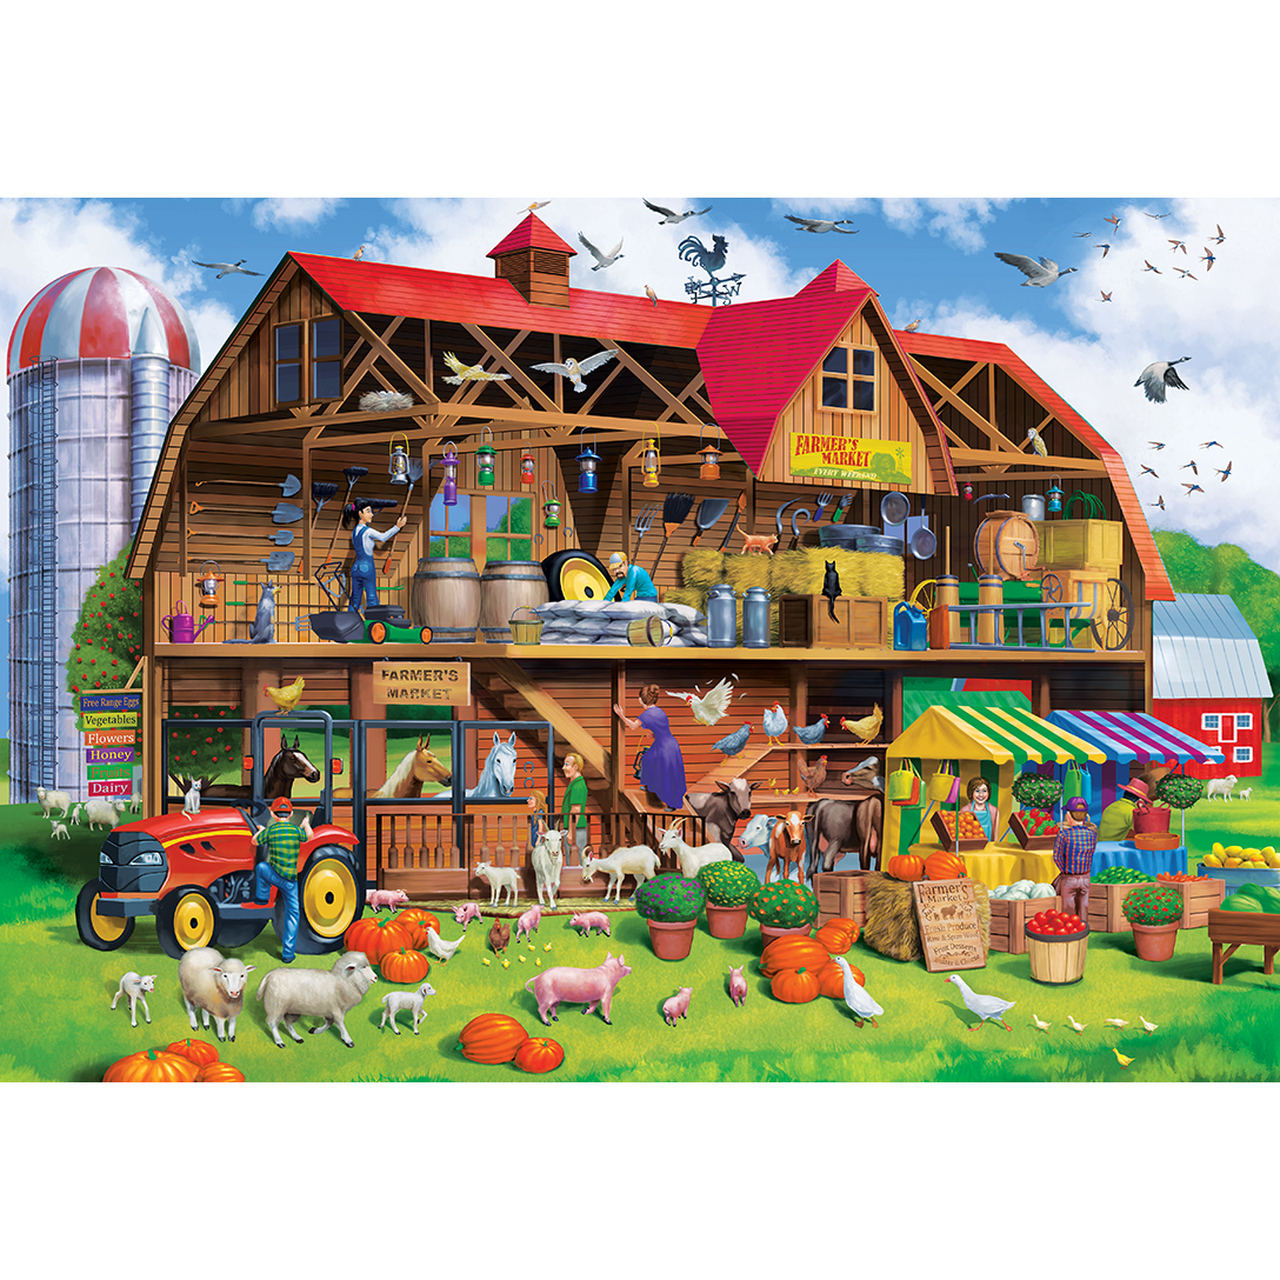 Puzzle Family Barn Master Pieces 71966 1000 Pieces Jigsaw Puzzles Farm Animals Jigsaw Puzzle